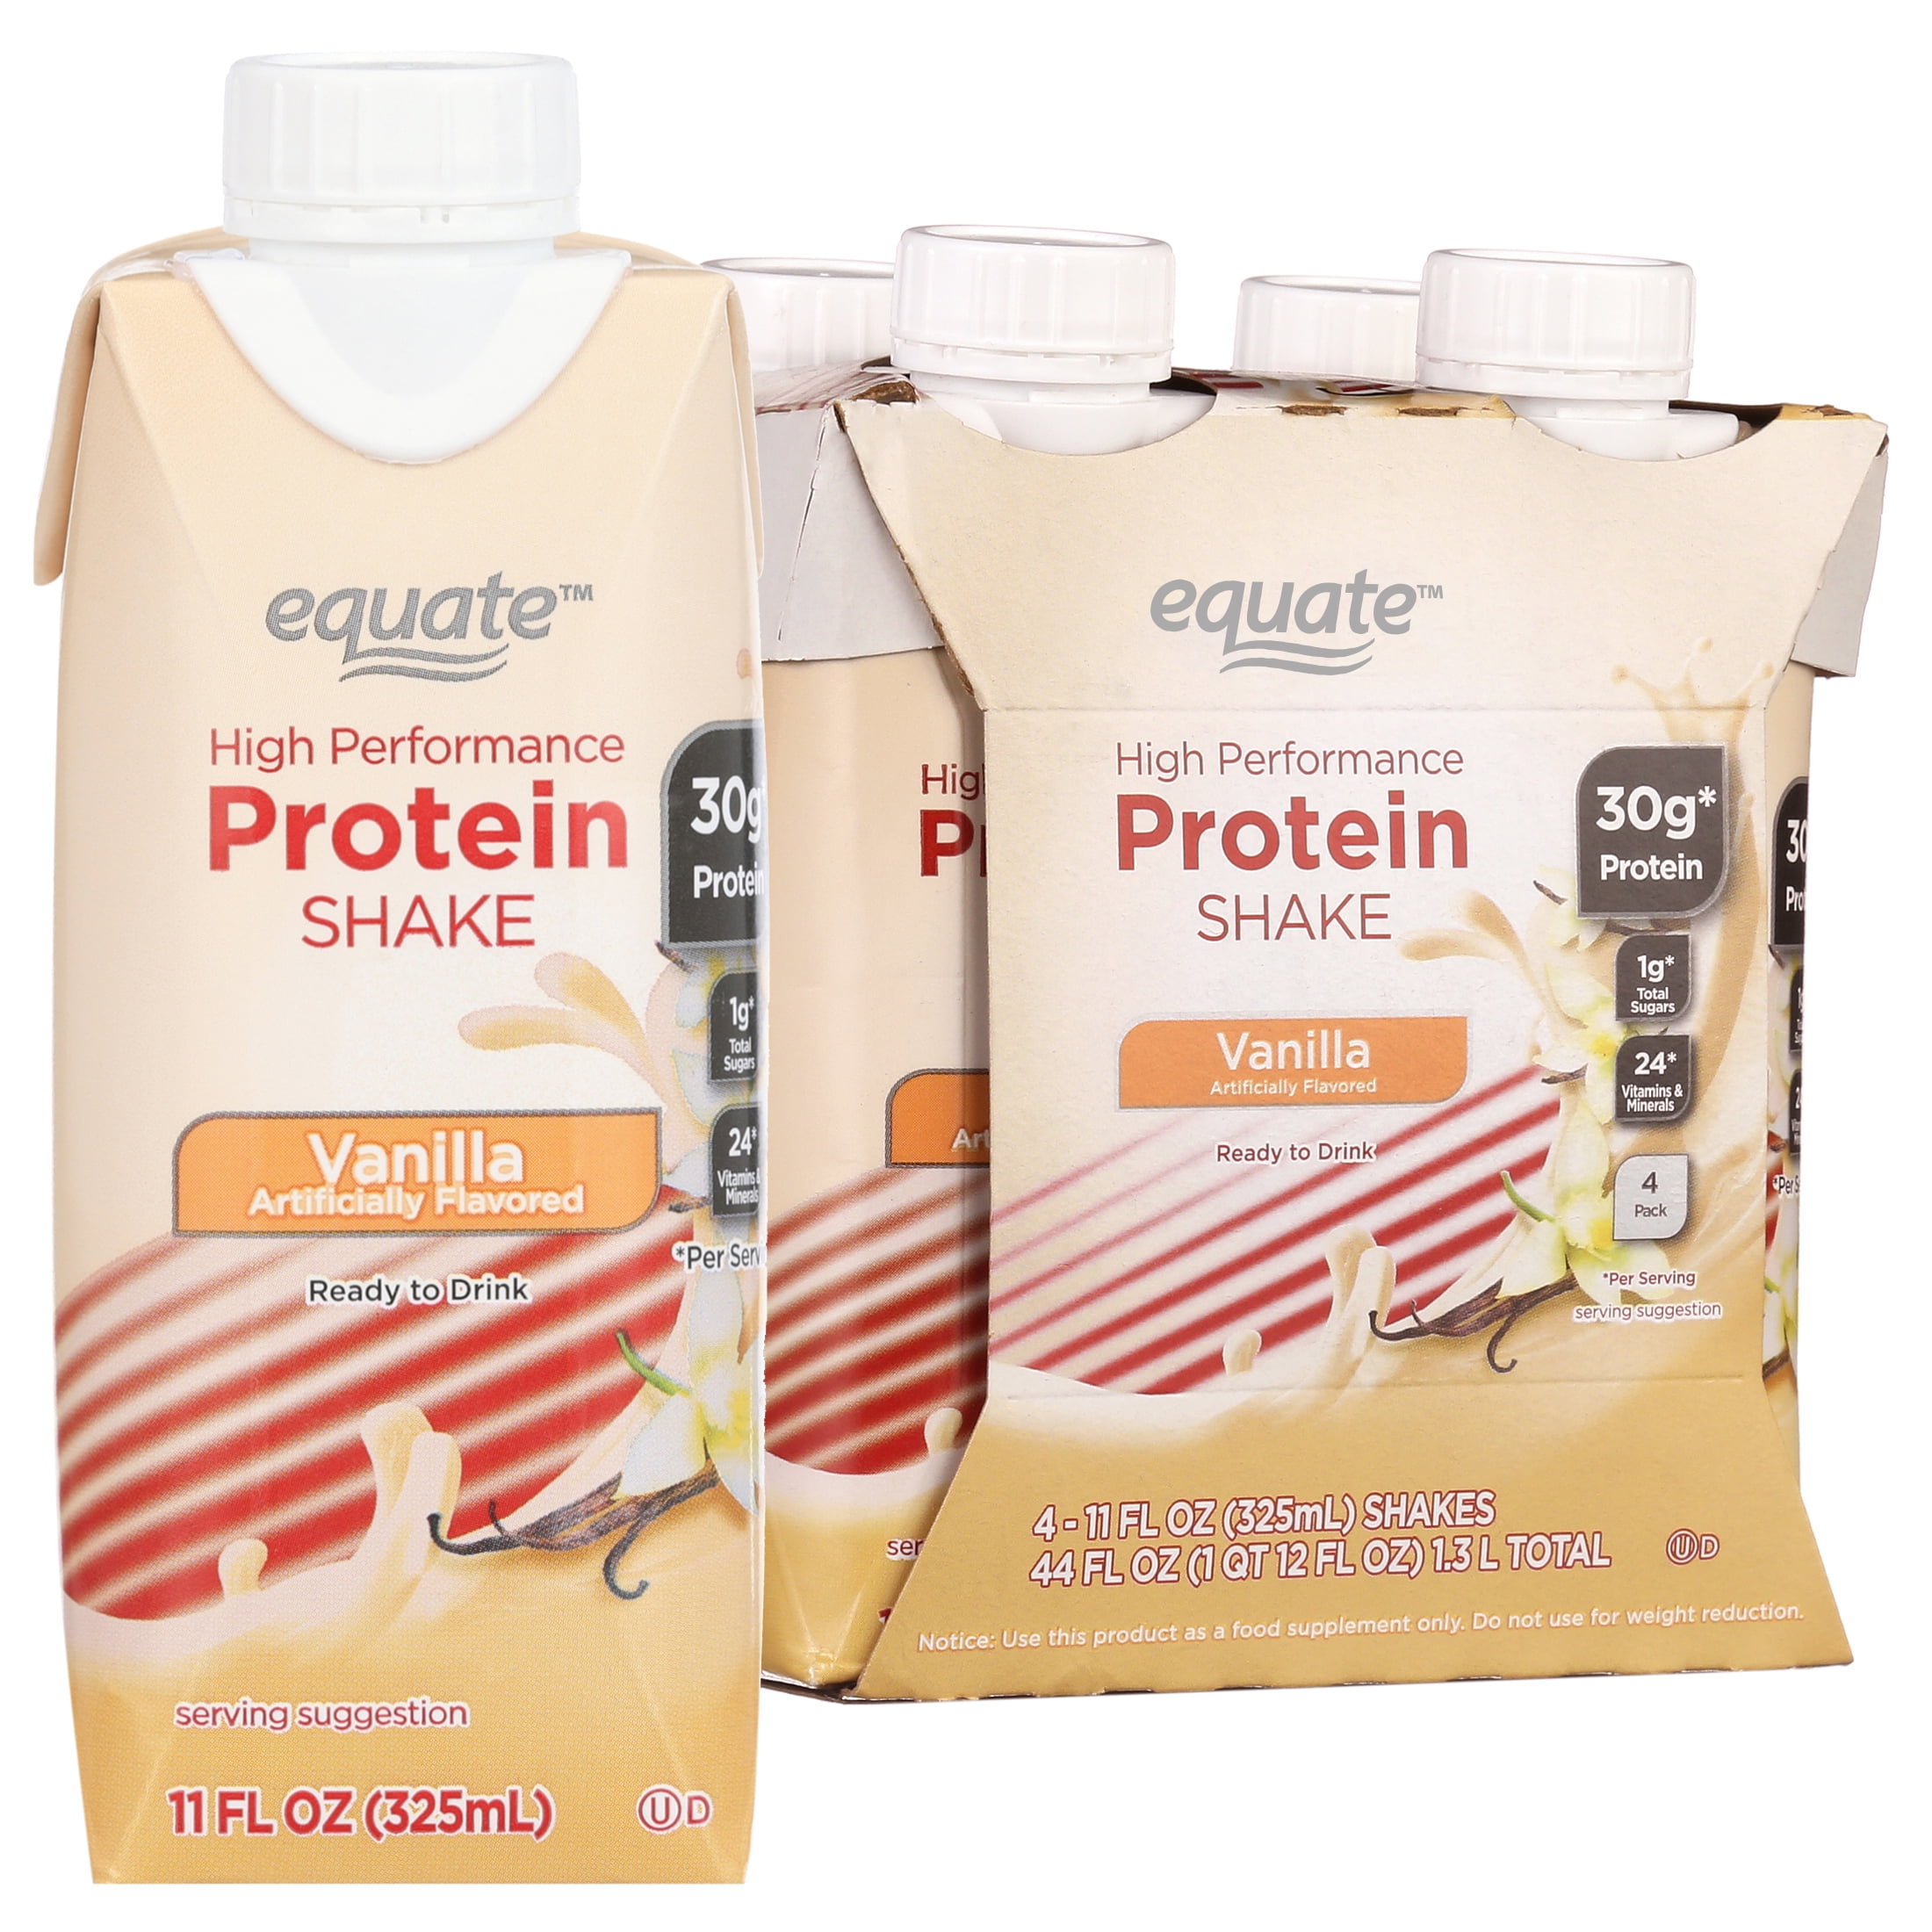 Equate High Performance Protein Shake, Vanilla, 30g Protein, 11 fl oz, 4 Count